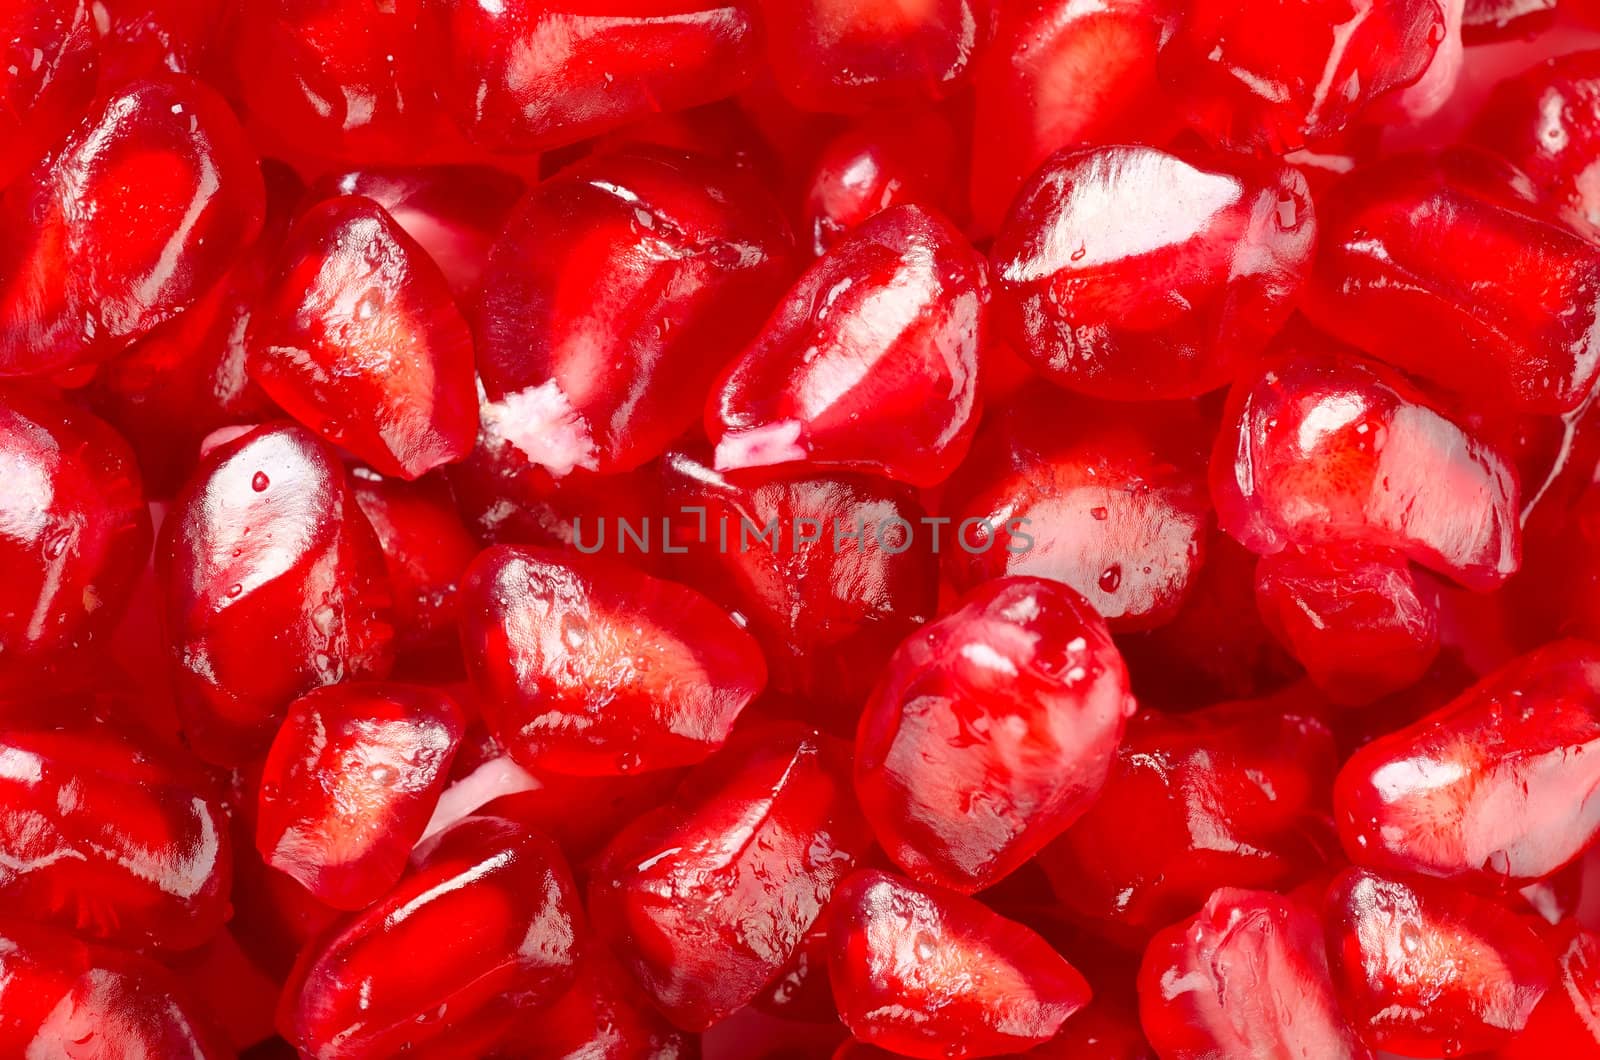 Ripe pomegranate seeds arranged as a background